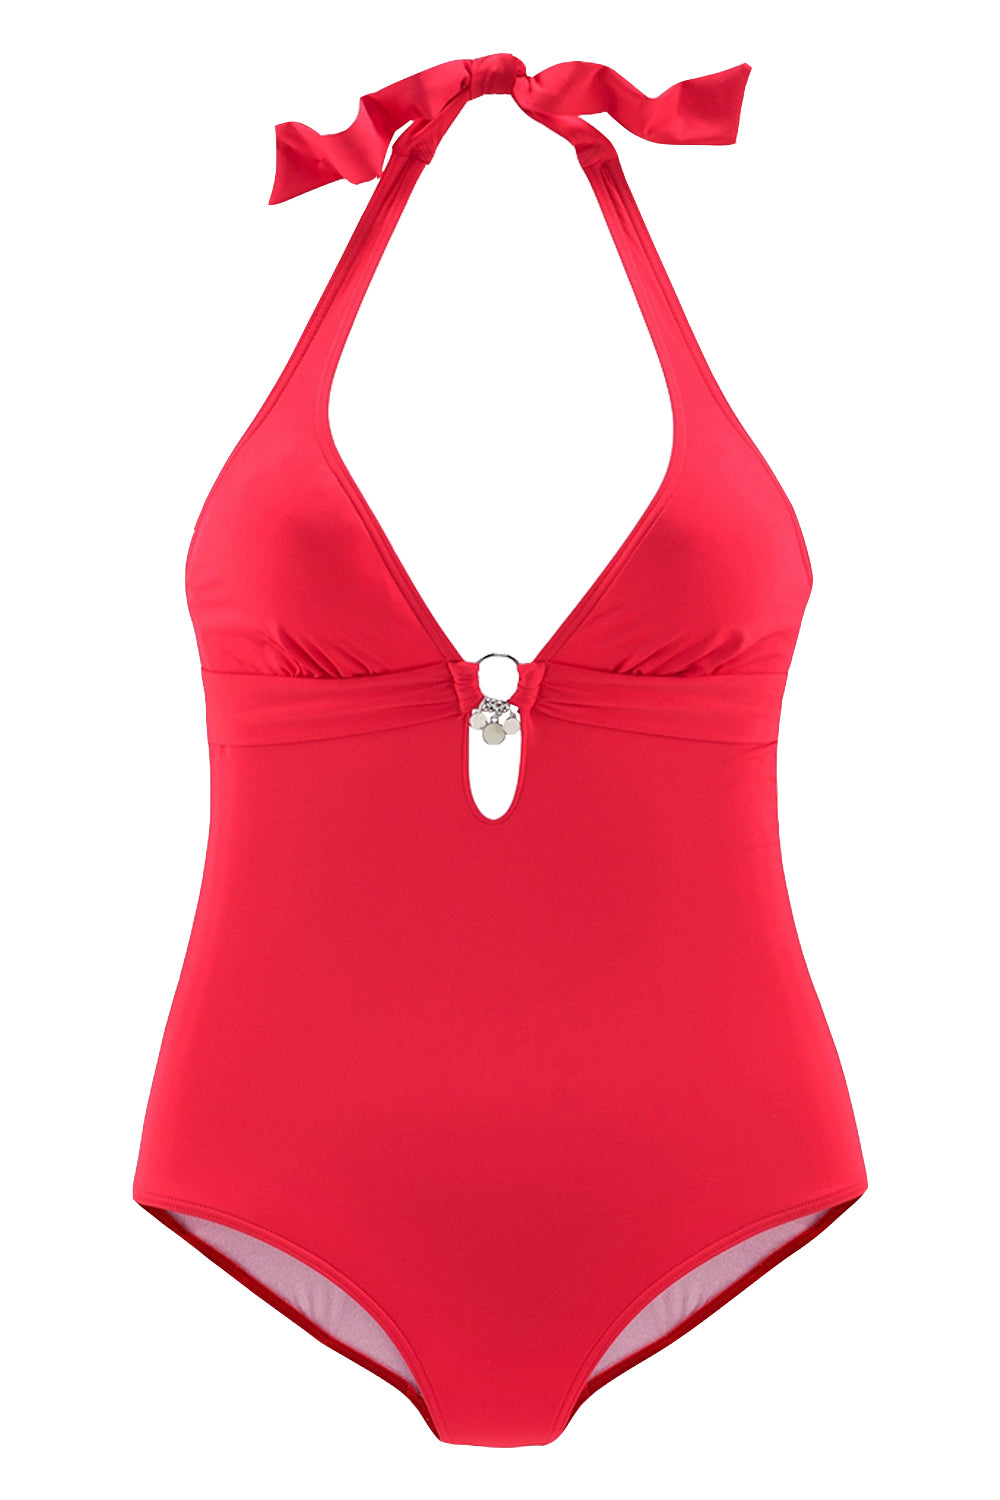 Iyasson Solid Halter One-piece Swimsuit With Silver Hardware Rings